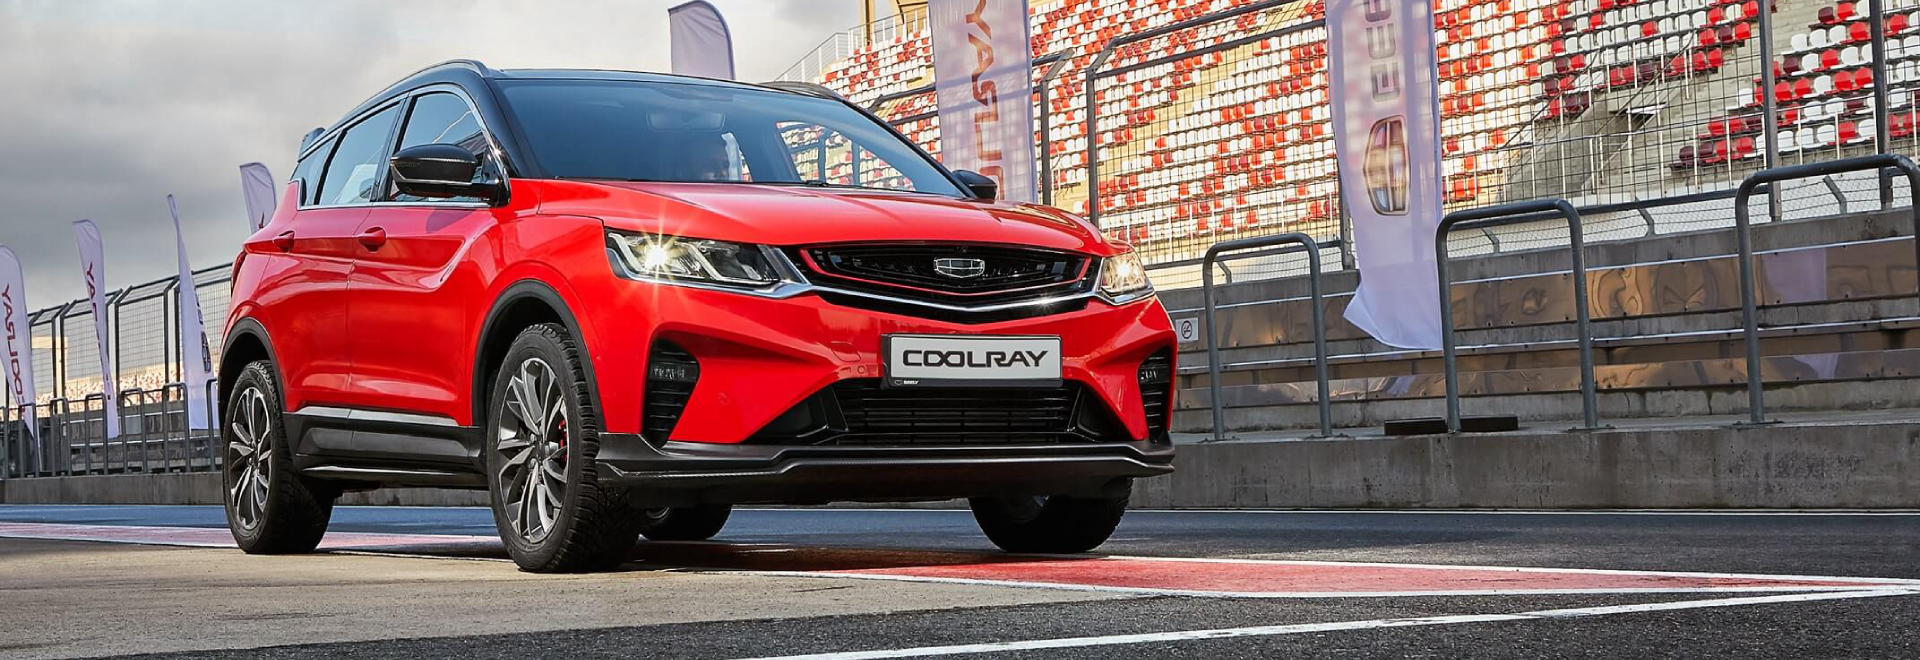 Geely Coolray SX11 1.5 AMT Flagship